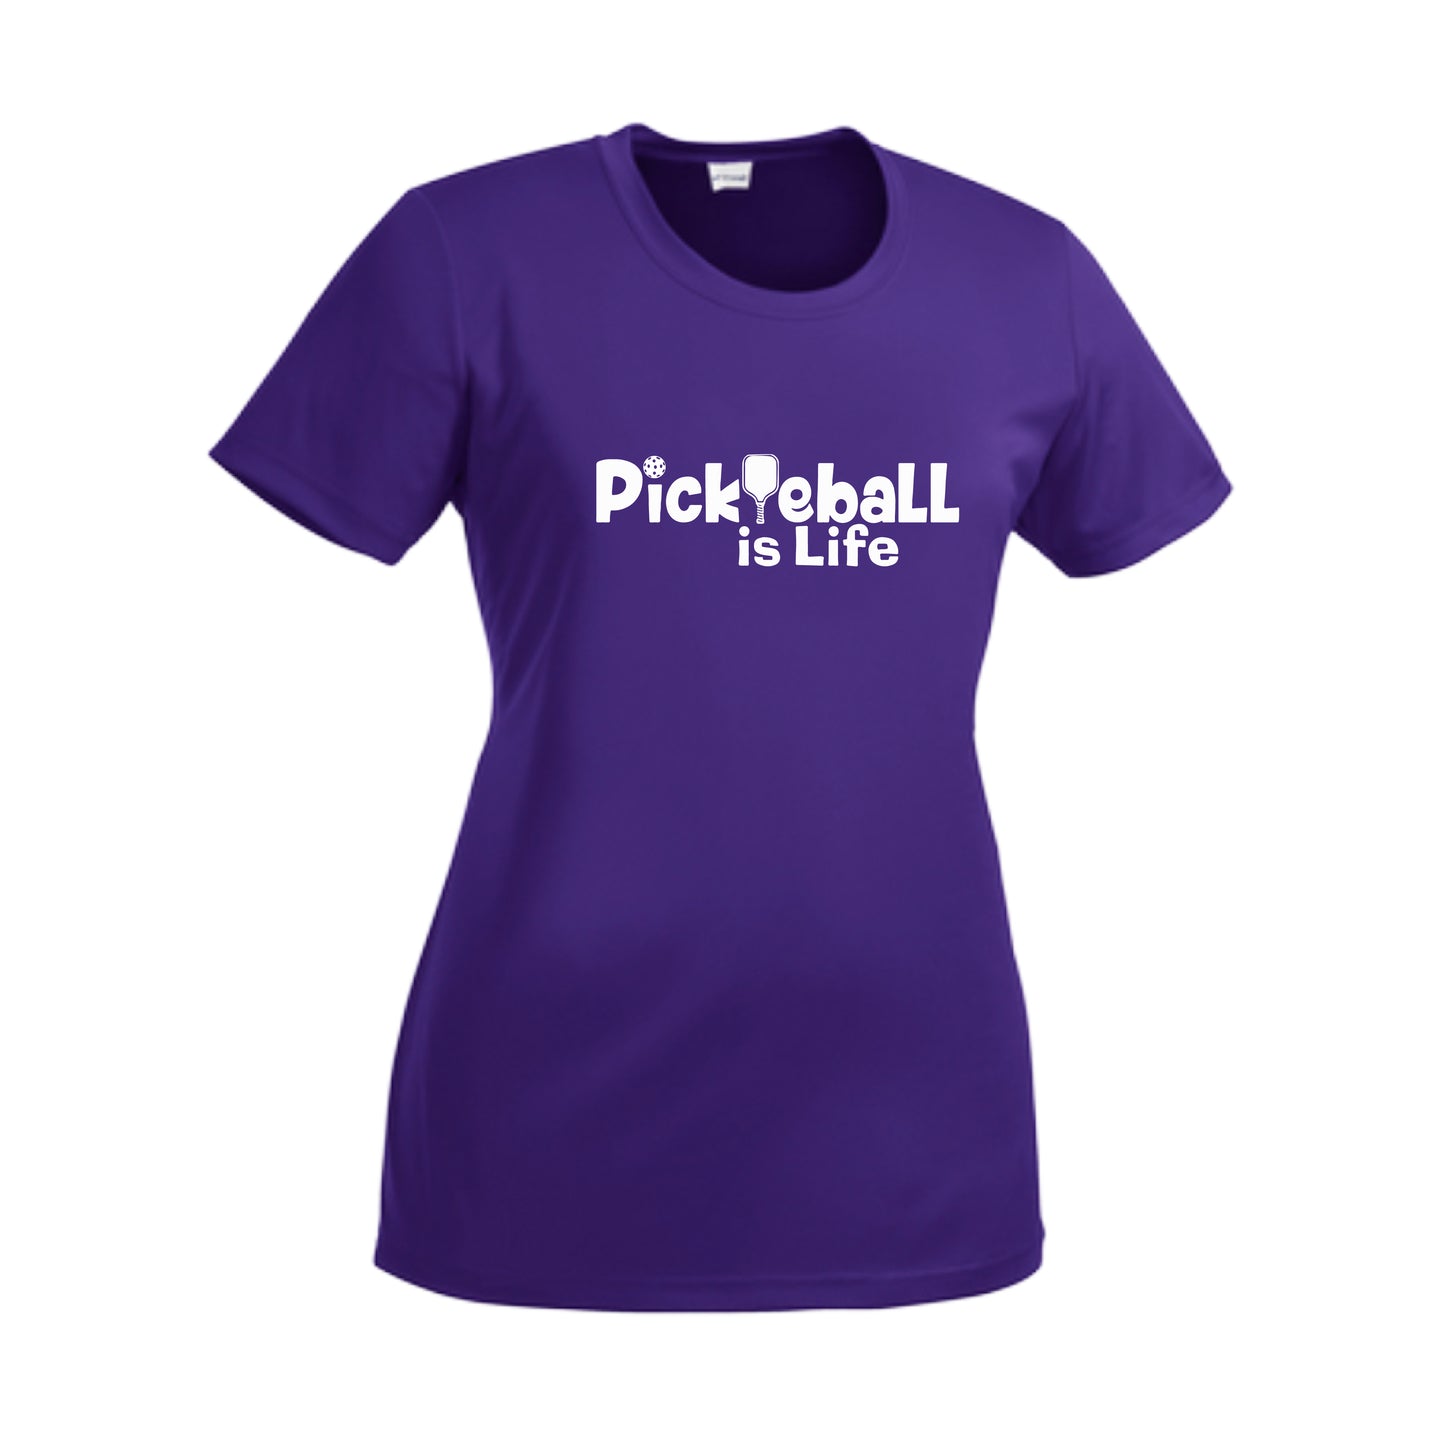 Pickleball Is LIfe | Women’s Short Sleeve Crewneck Athletic Shirts | 100% Polyester